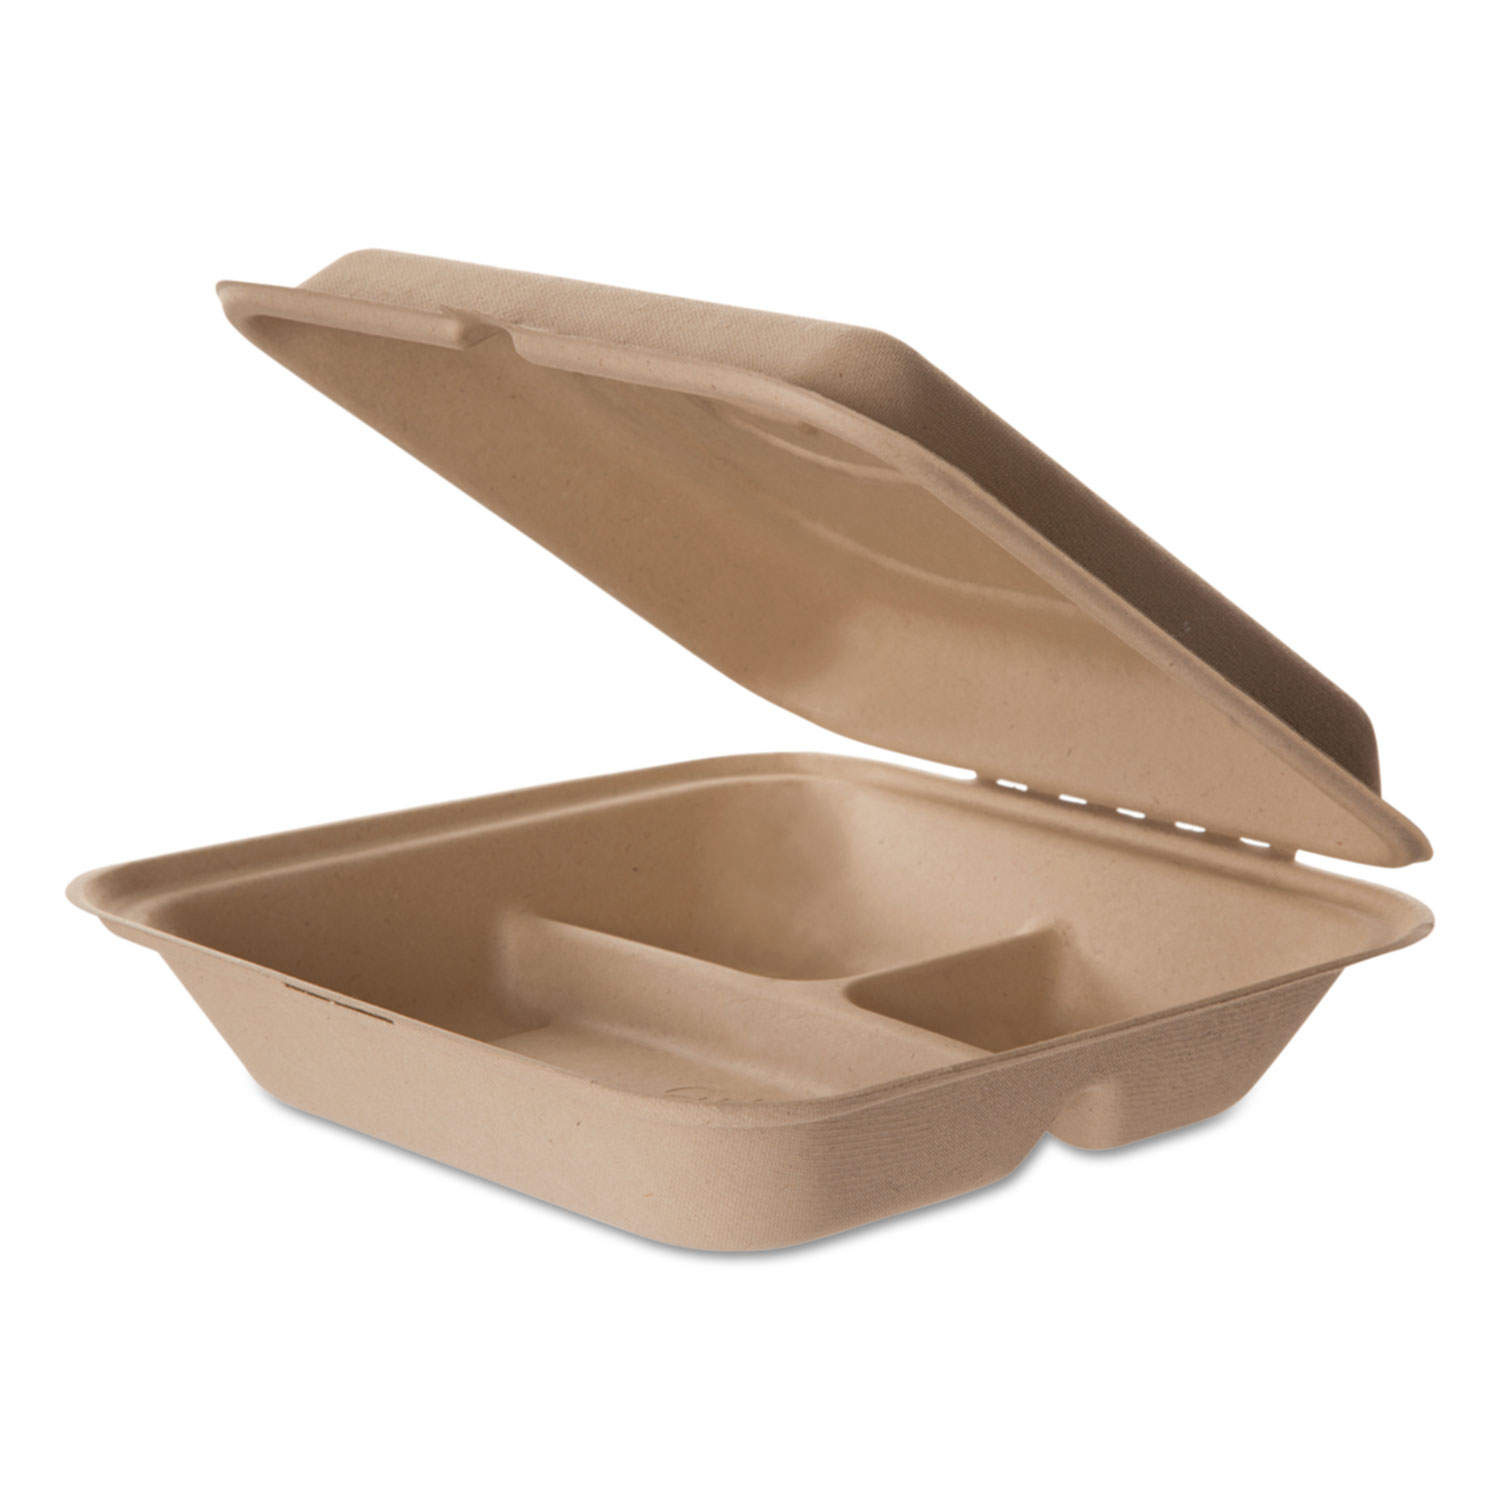  Eco-Products EP-HCW93 Wheat Straw Hinged Clamshell Containers, 9 x 9 x 3, 3-Compartment, 200/Carton (ECOEPHCW93) 